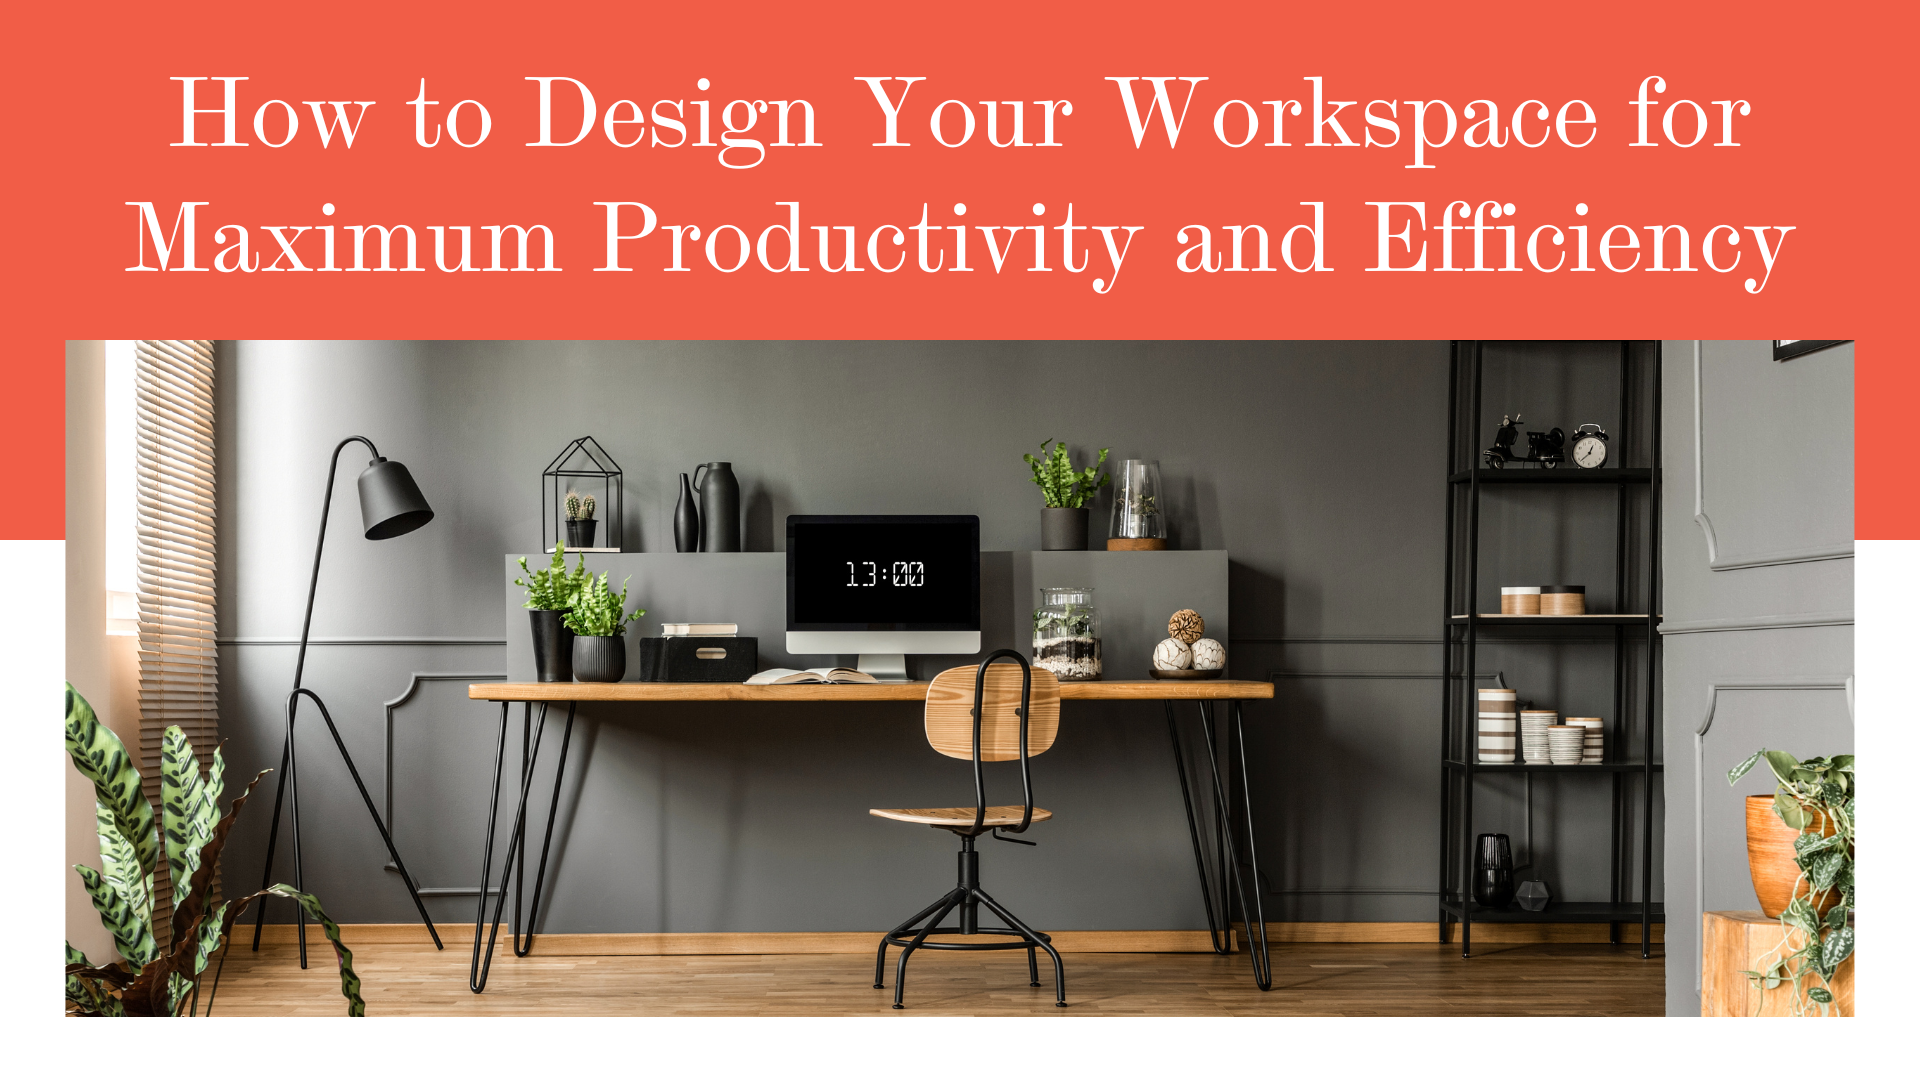 designing a workspace for maximum productivity